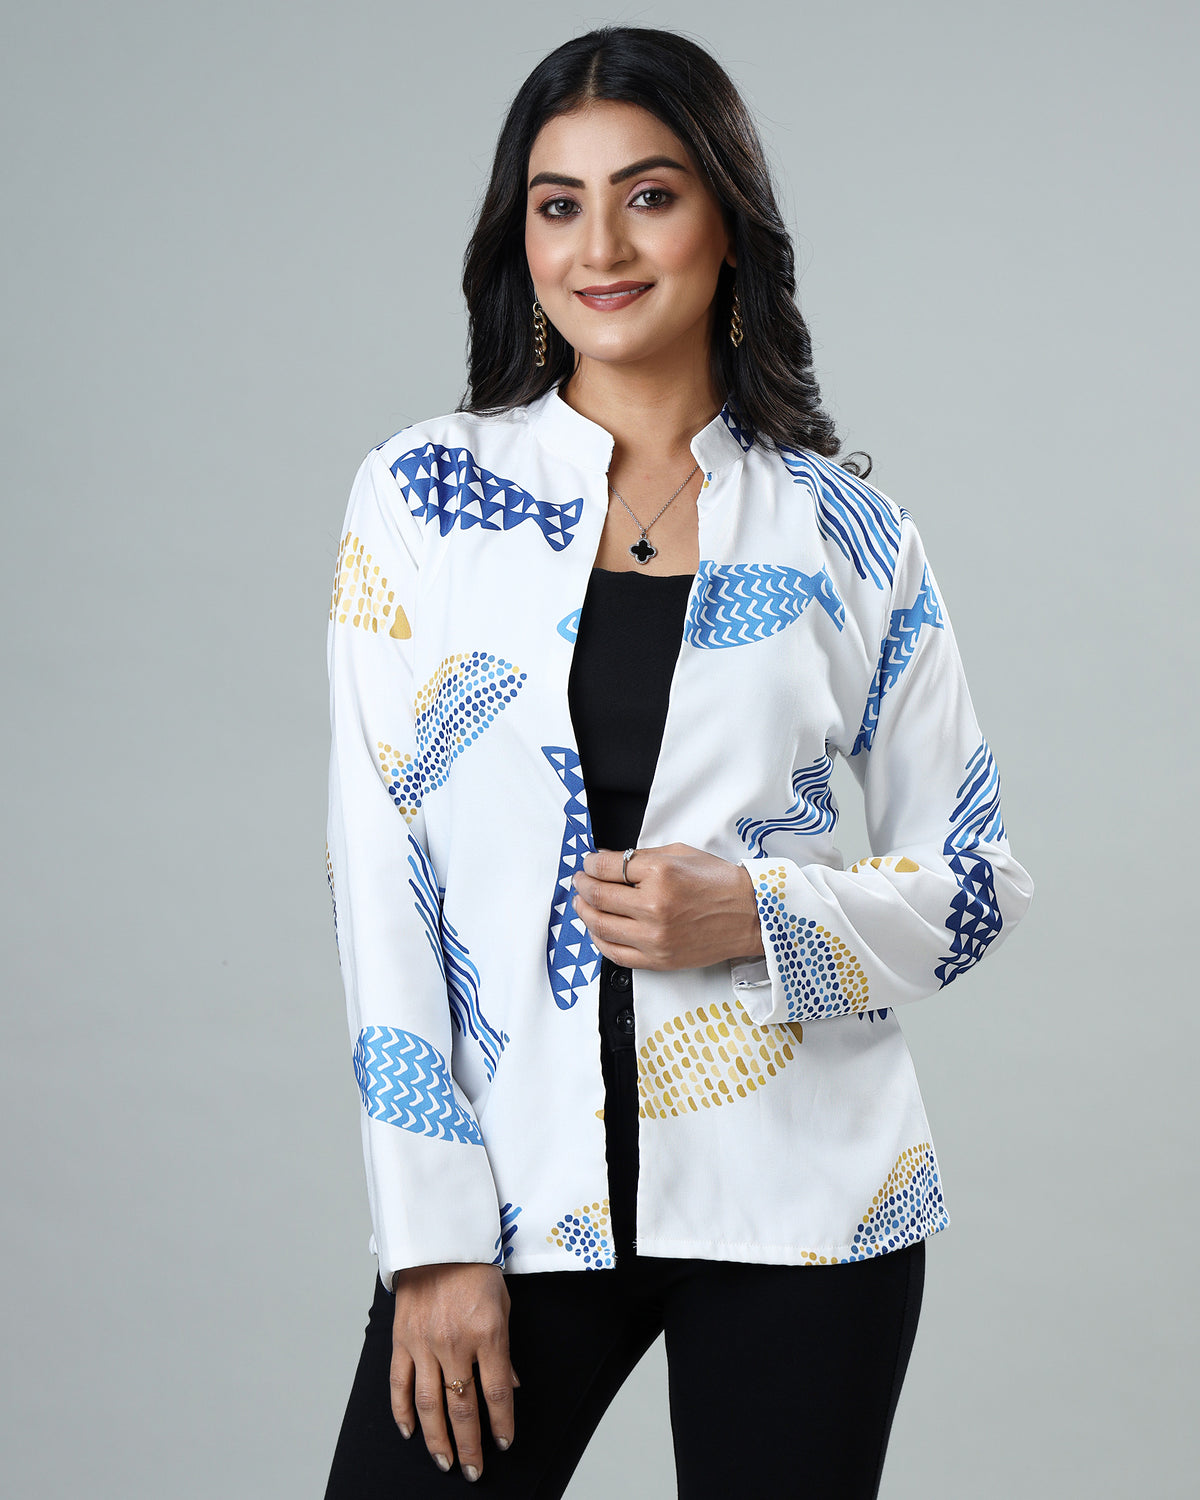 Fishing For Style: The Blue Fish Women's Jacket